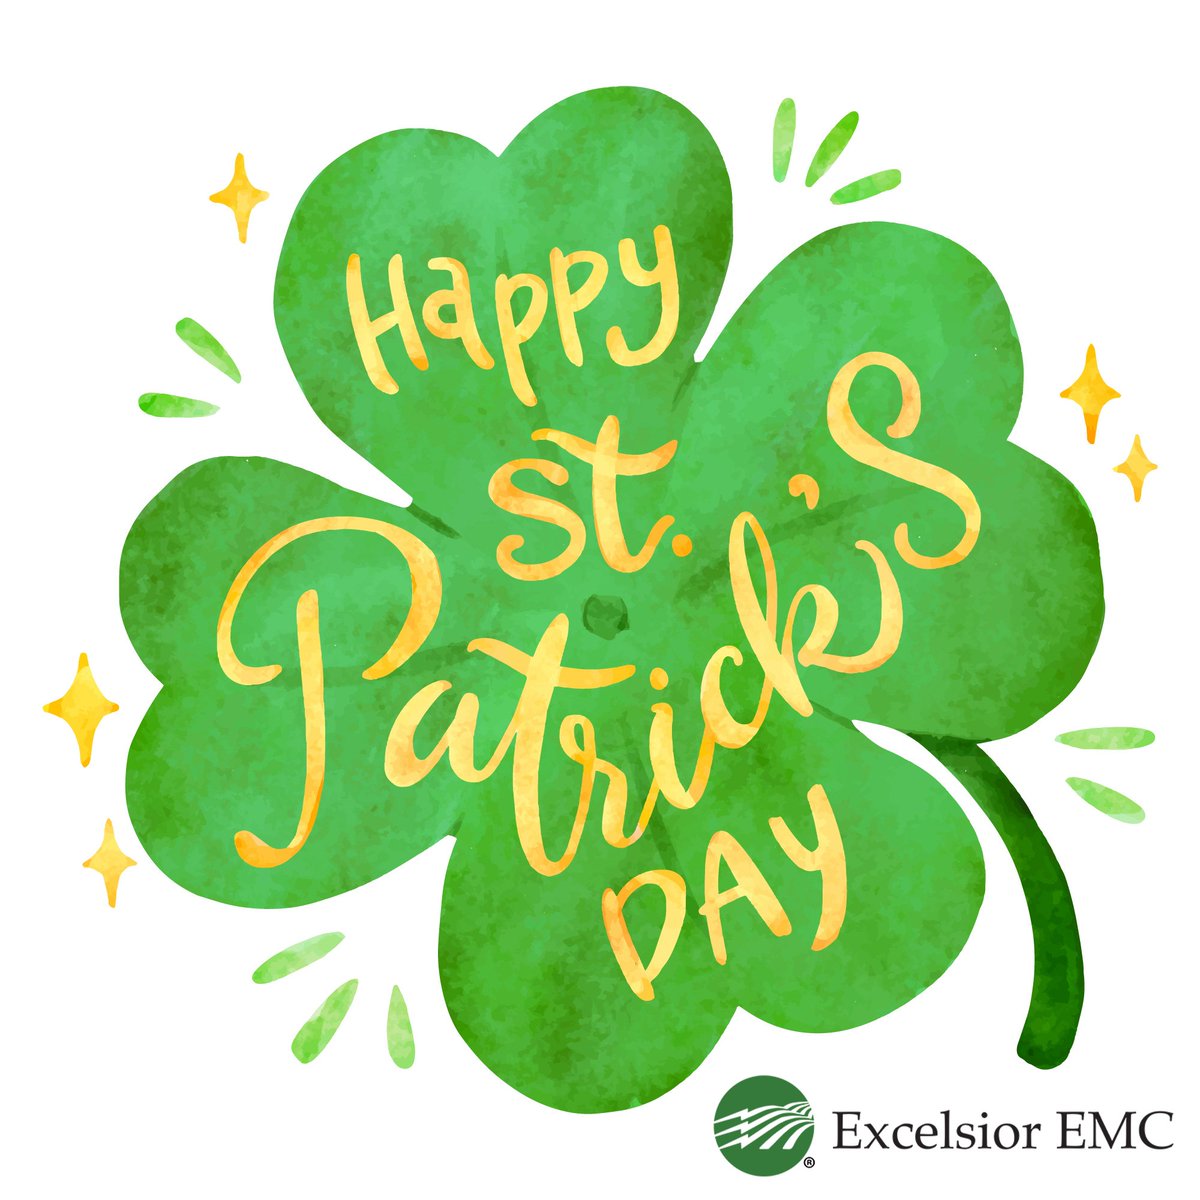 Shamrocks and luck, but safety first! 🍀 This St. Patrick's Day, our power company is spreading more than just green vibes. We're here to ensure your day stays bright and your energy flows smoothly. Stay safe, stay green, and let's  light up the celebrations together!  #StPat ...